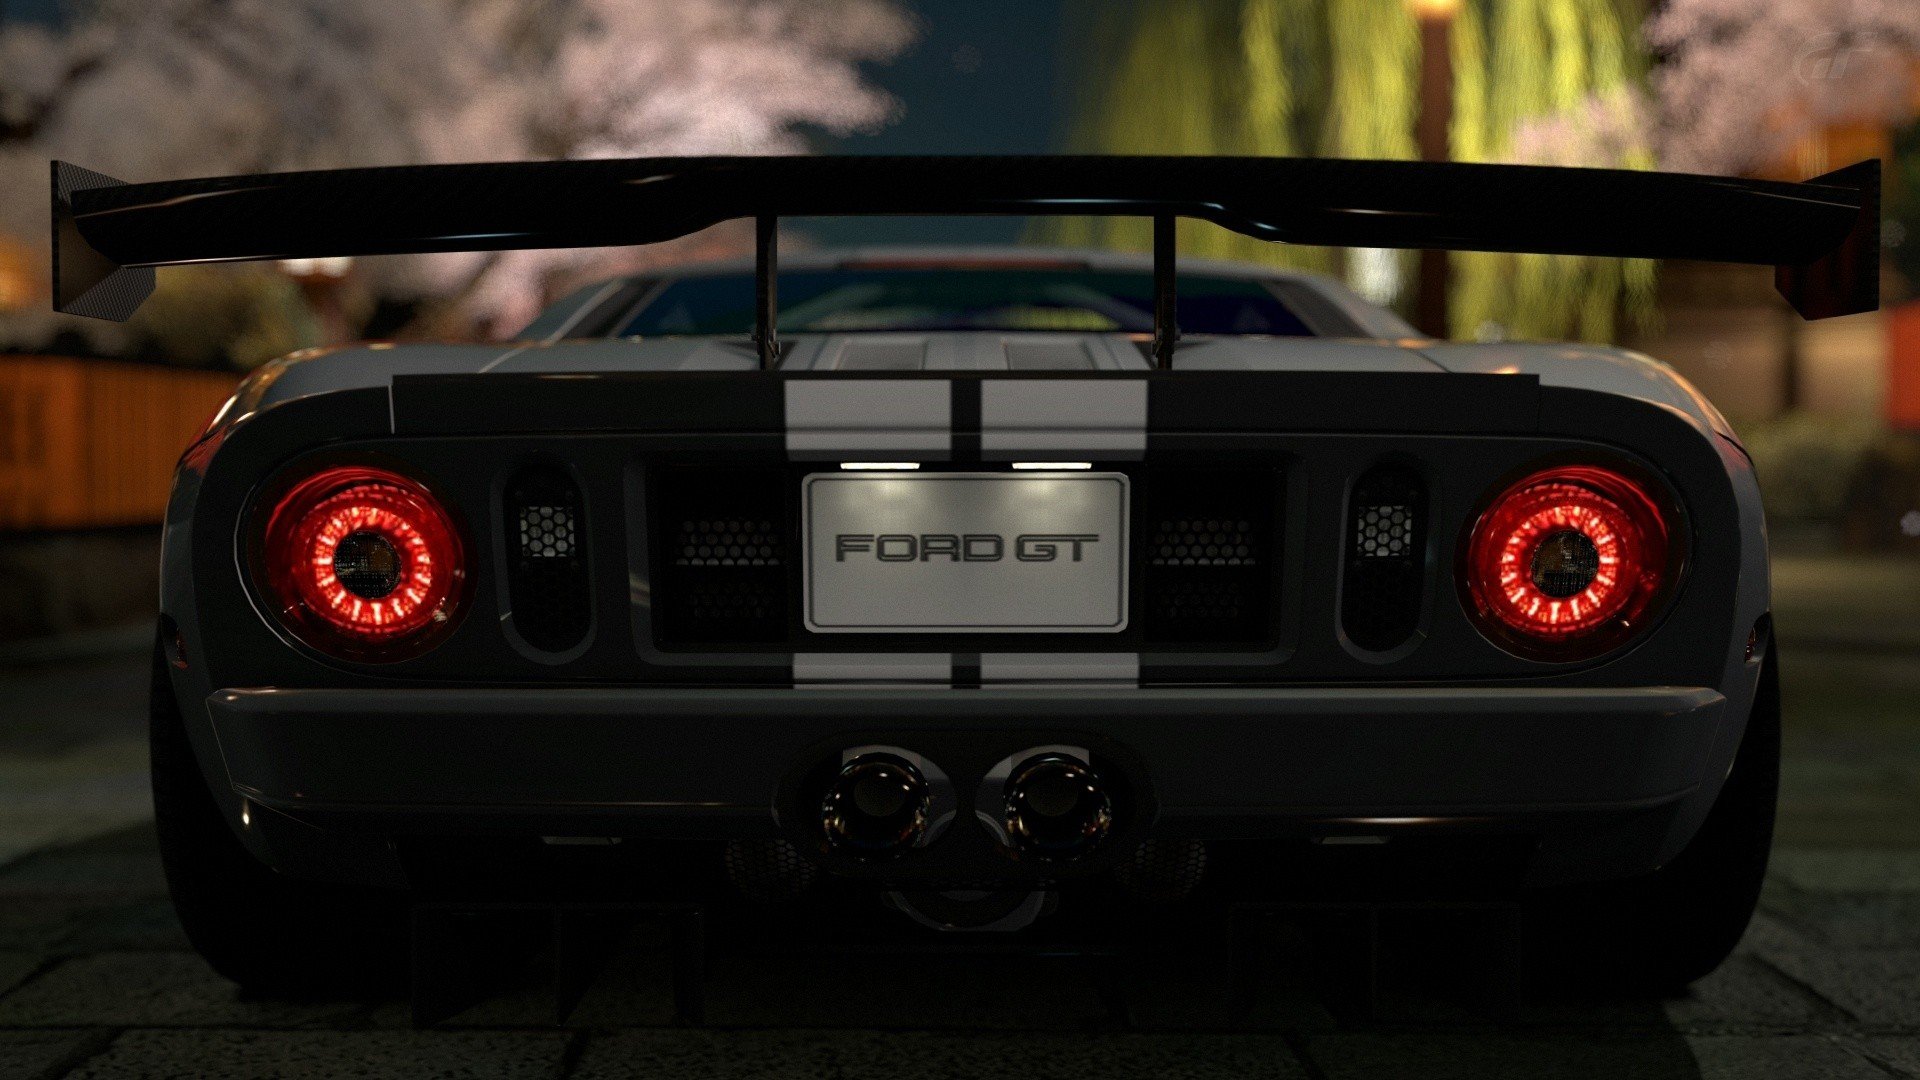 cars, Ford, Gran, Turismo, Ford, Gt, Spoiler, Rear, View, Cars Wallpaper